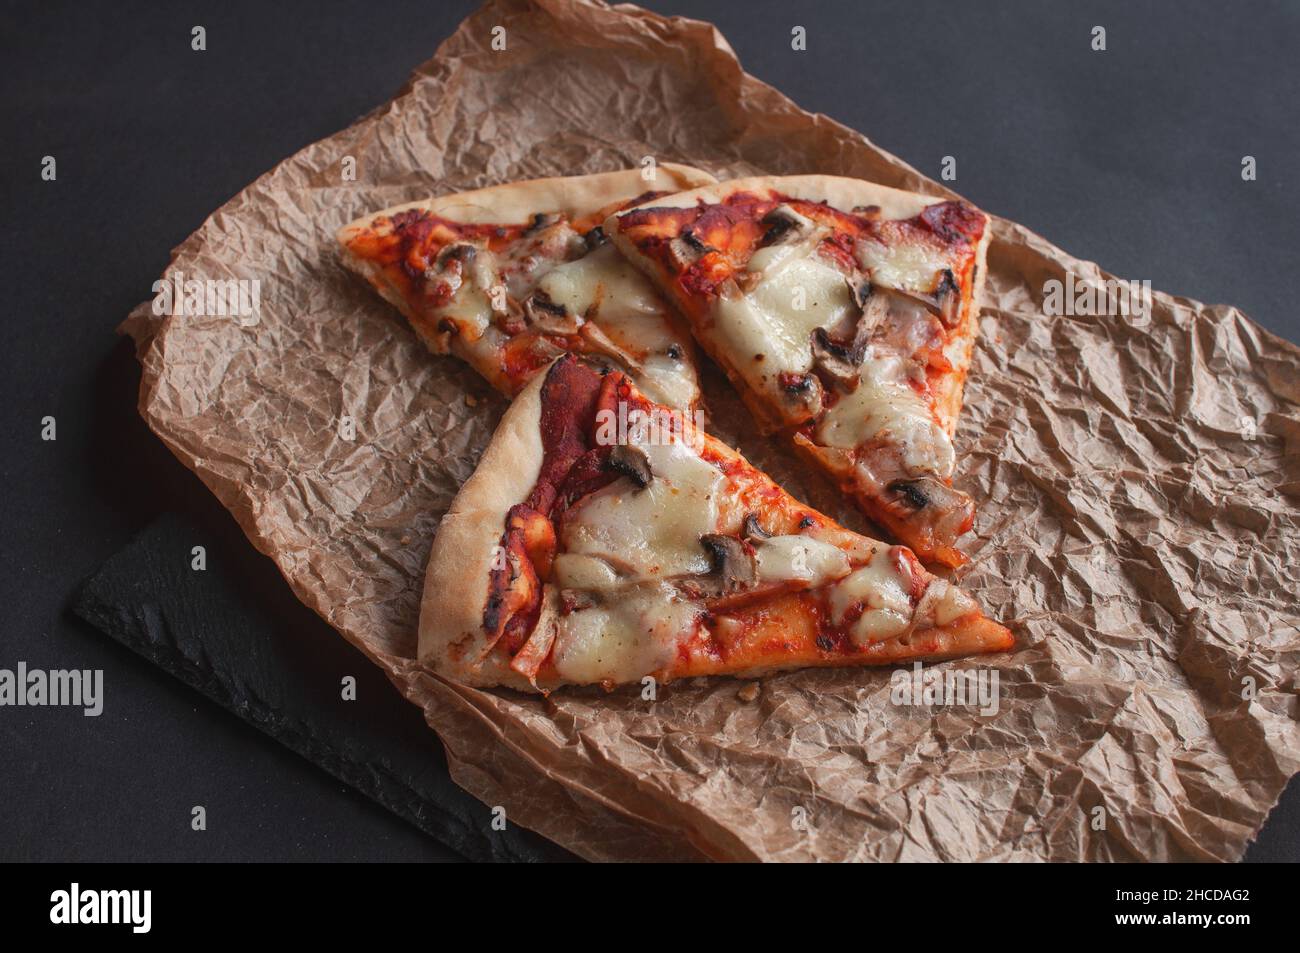 slices of freshly baked pizza on a black serving chalkboard on a dark background Stock Photo